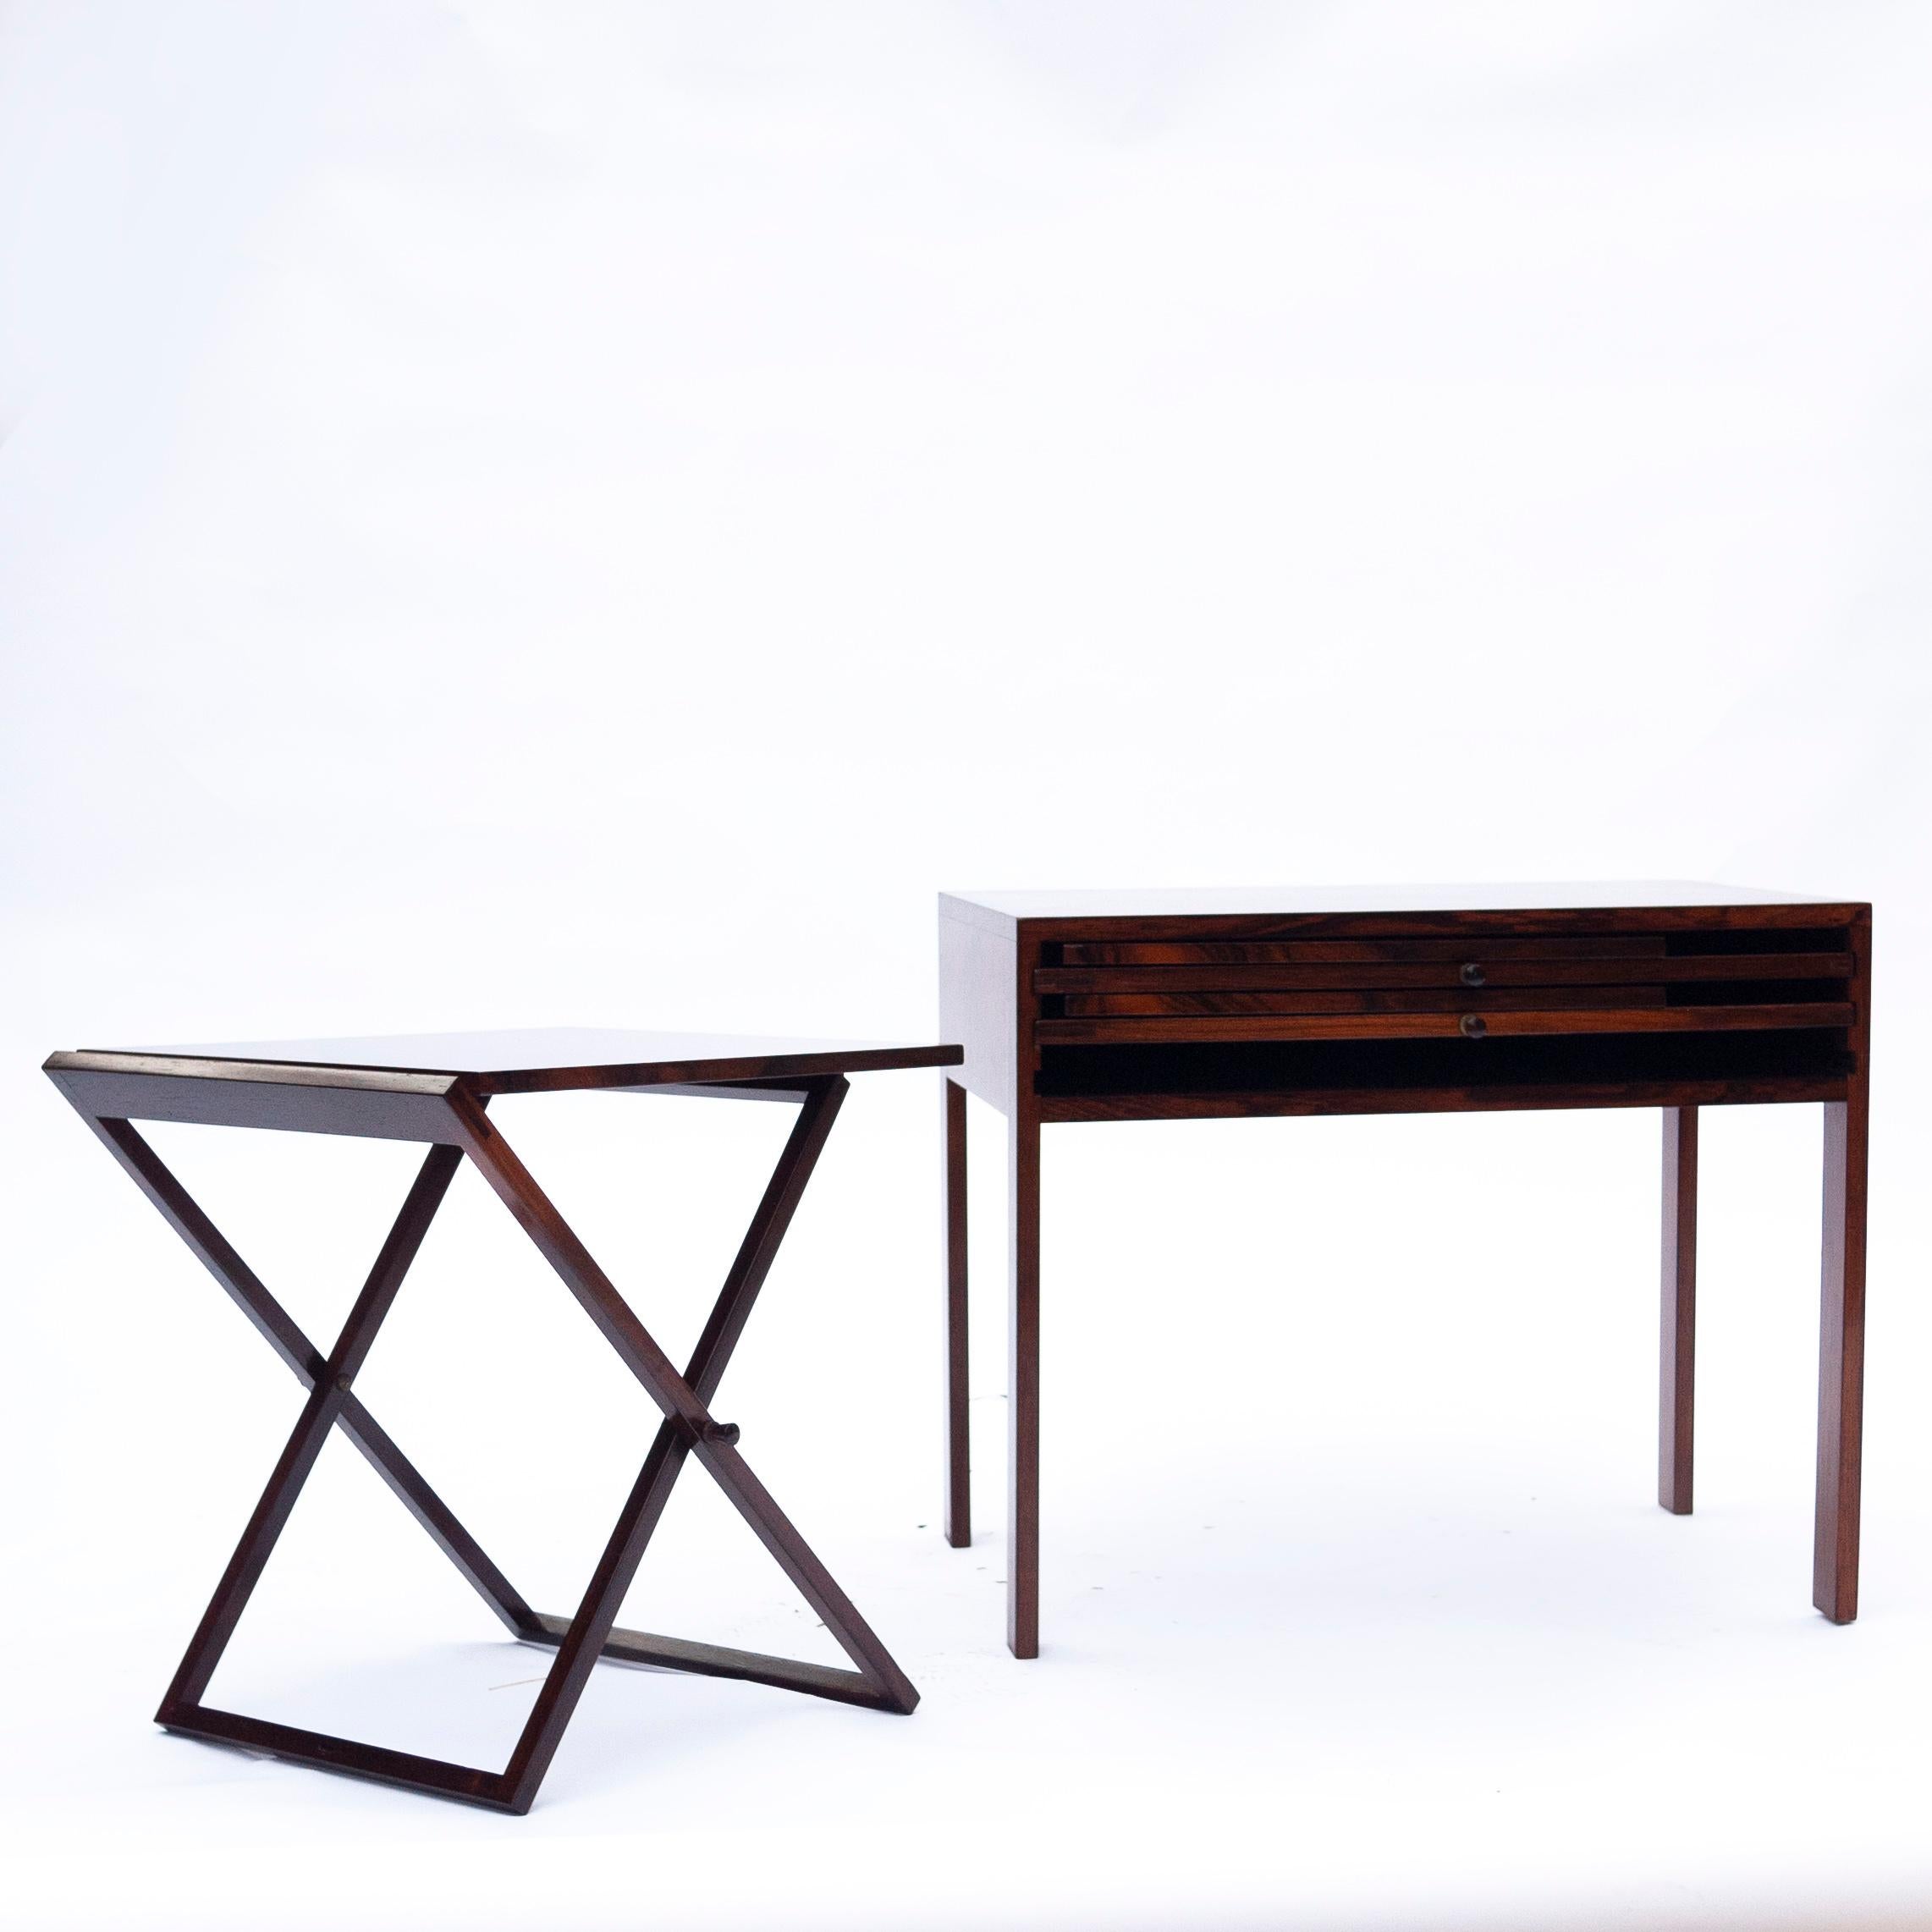 Danish Scandinavian Nesting Tables and Side Table in Rosewood by Illum Wikkelsø, 1960s For Sale